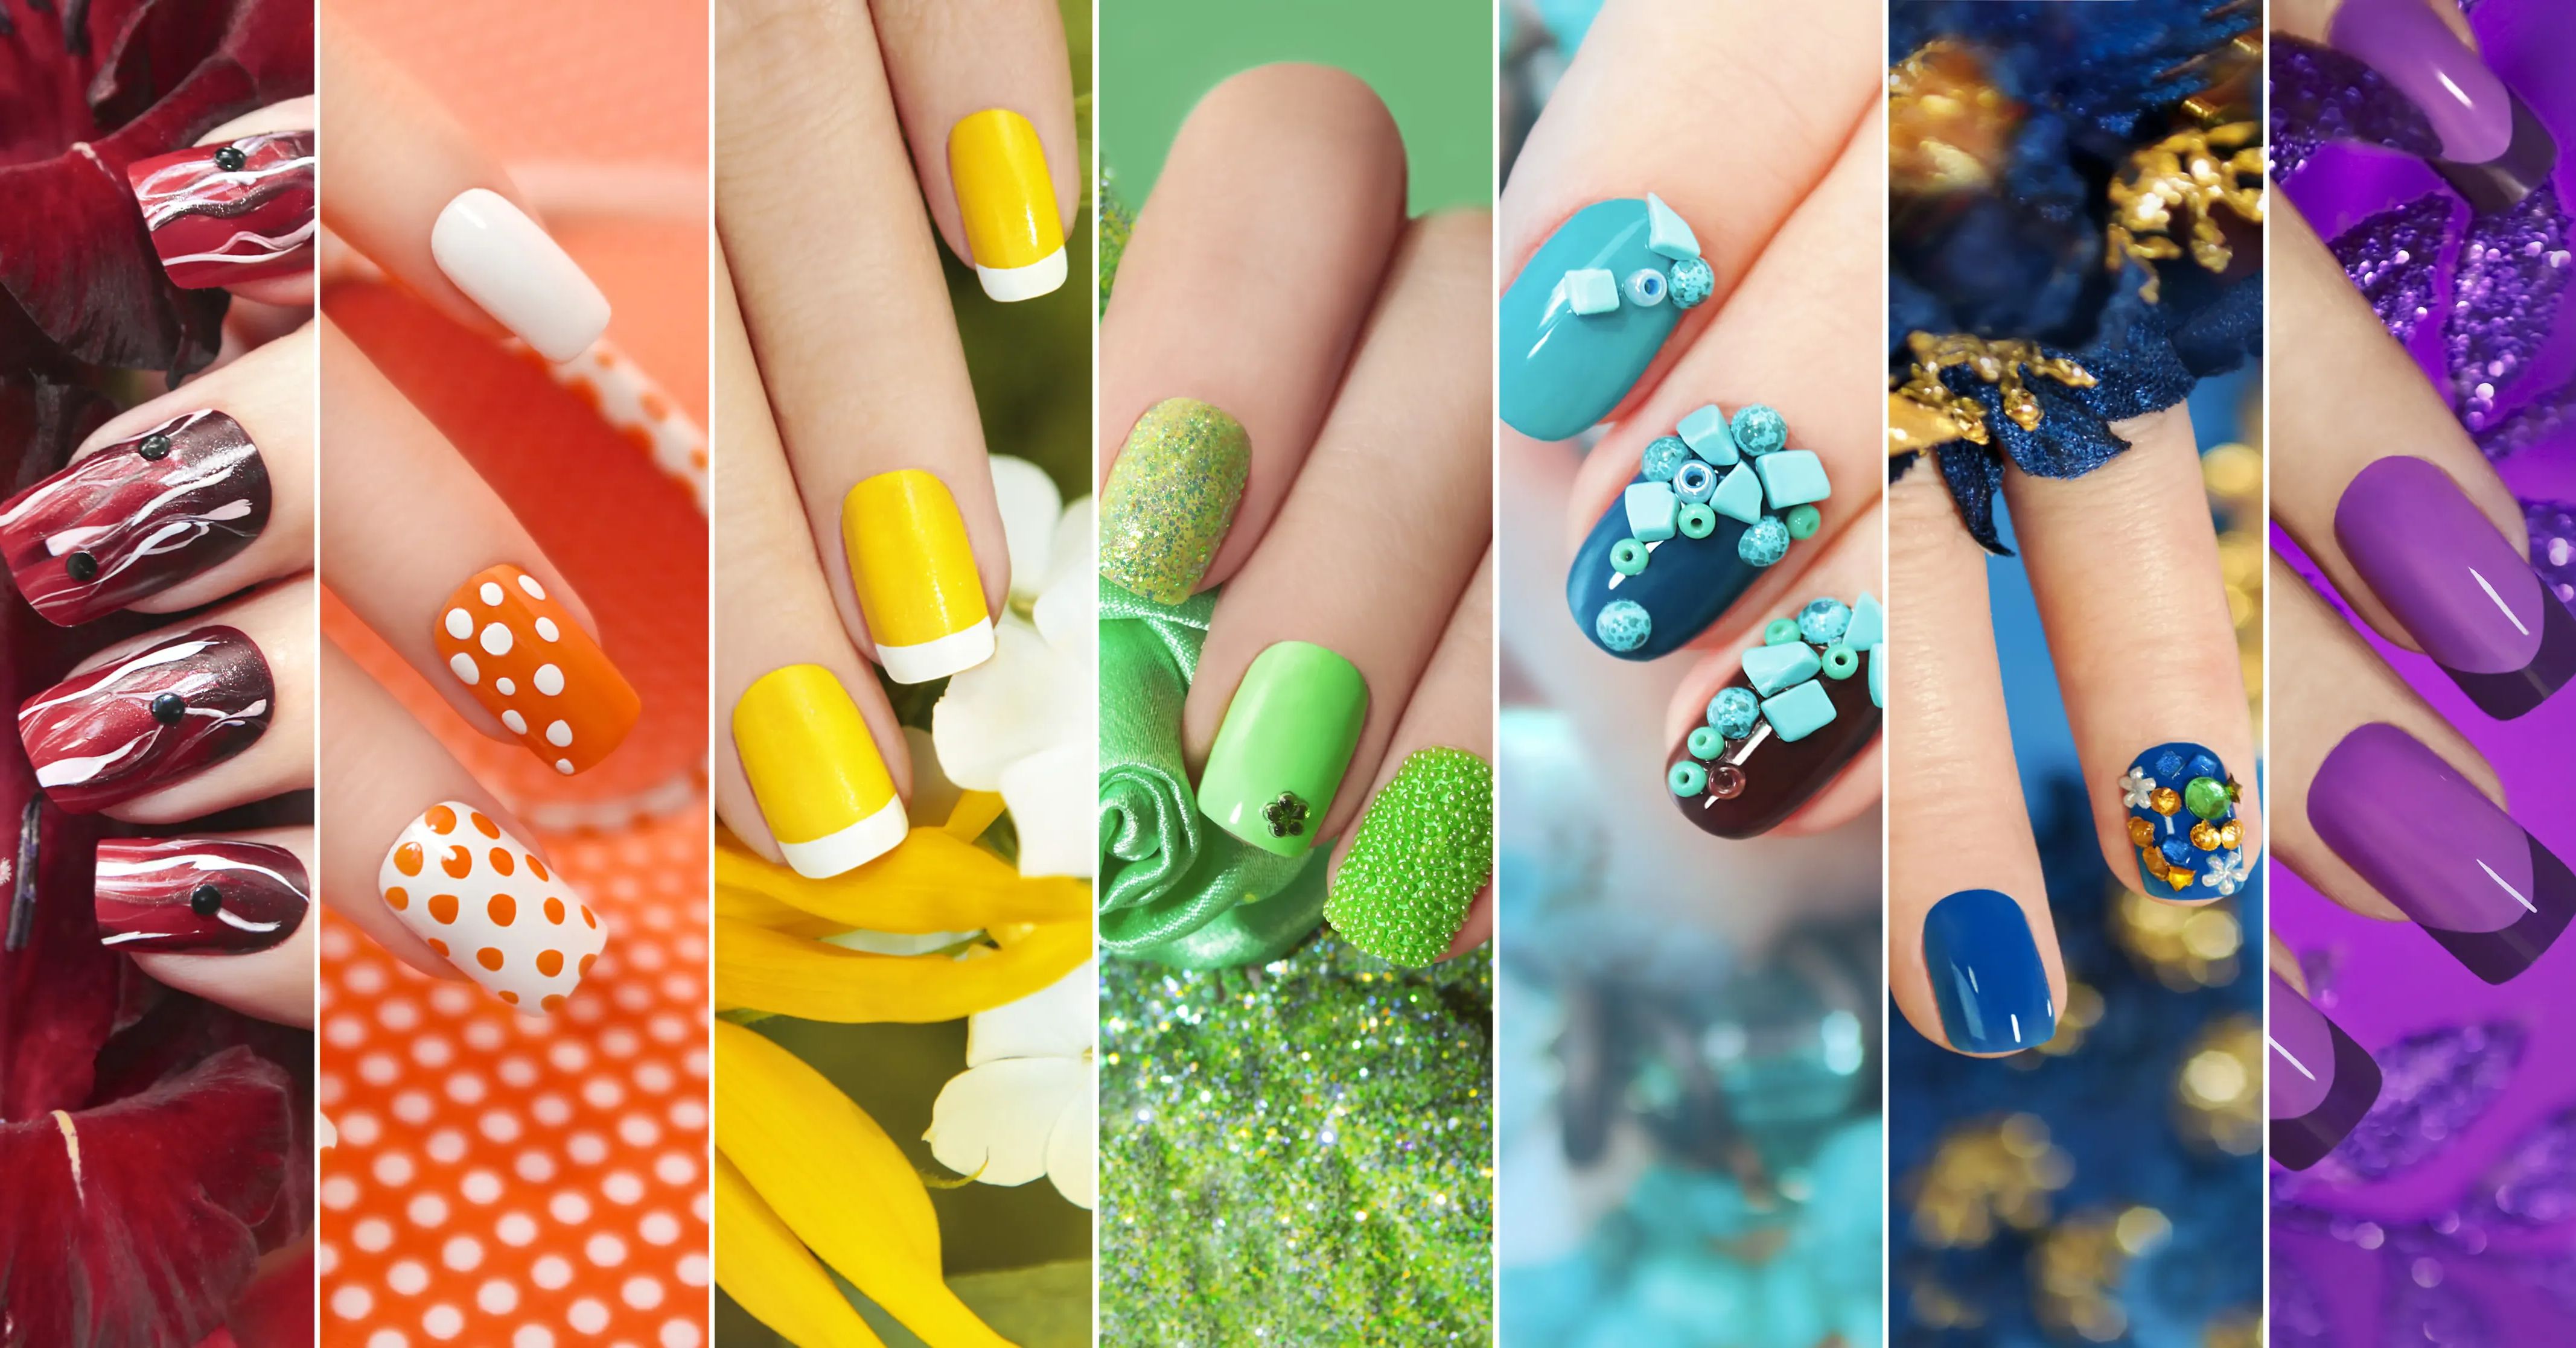 3. Top 10 Most Popular Nail Art Designs on Pinterest - wide 6